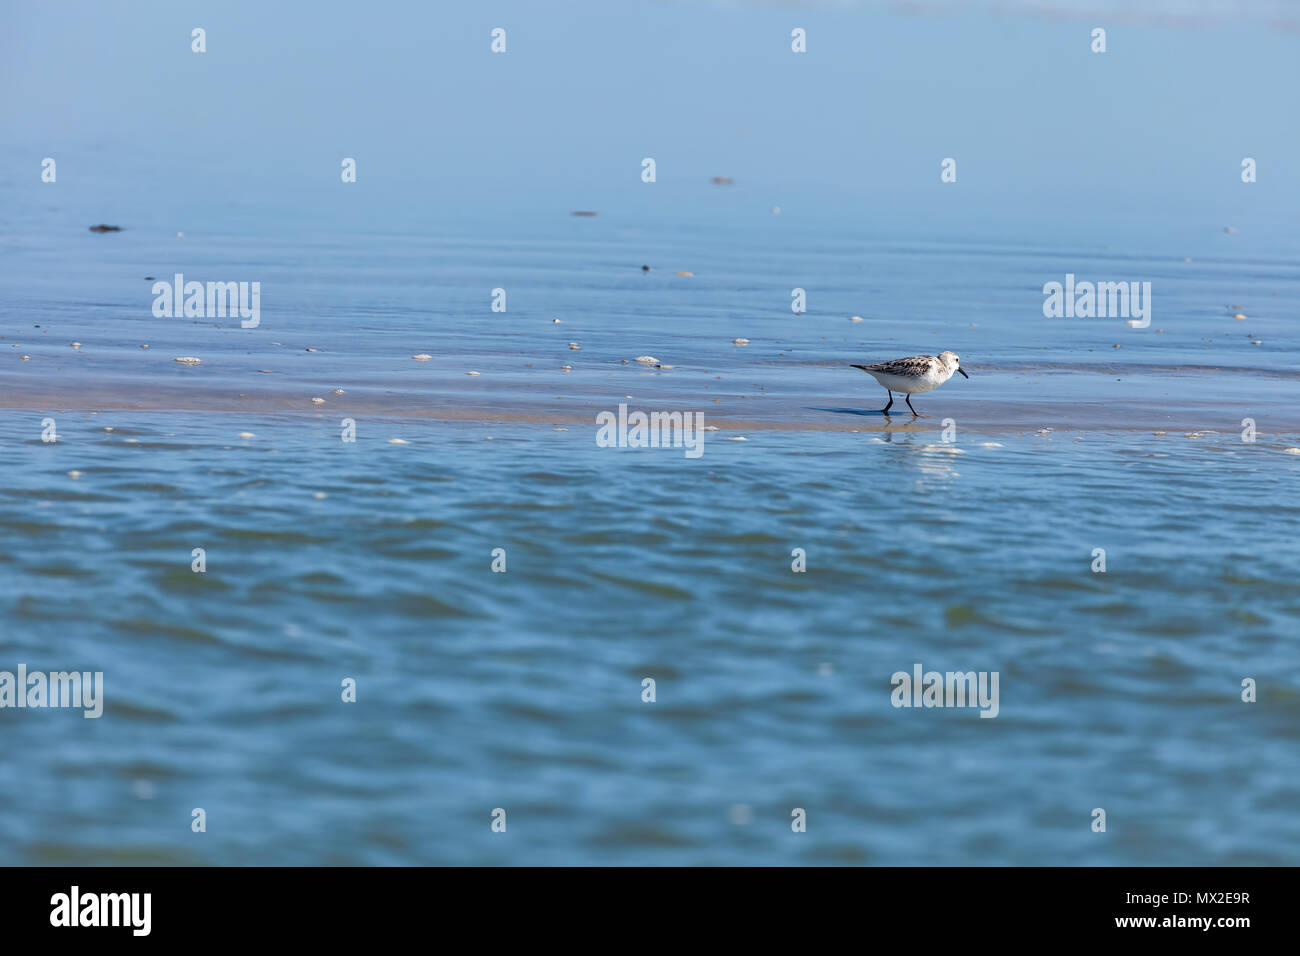 Lone western sandpiper (Calidris mauri) foraged for food along the coast in Chincoteague National Wildlife Refuge, Virginia, United States. Stock Photo